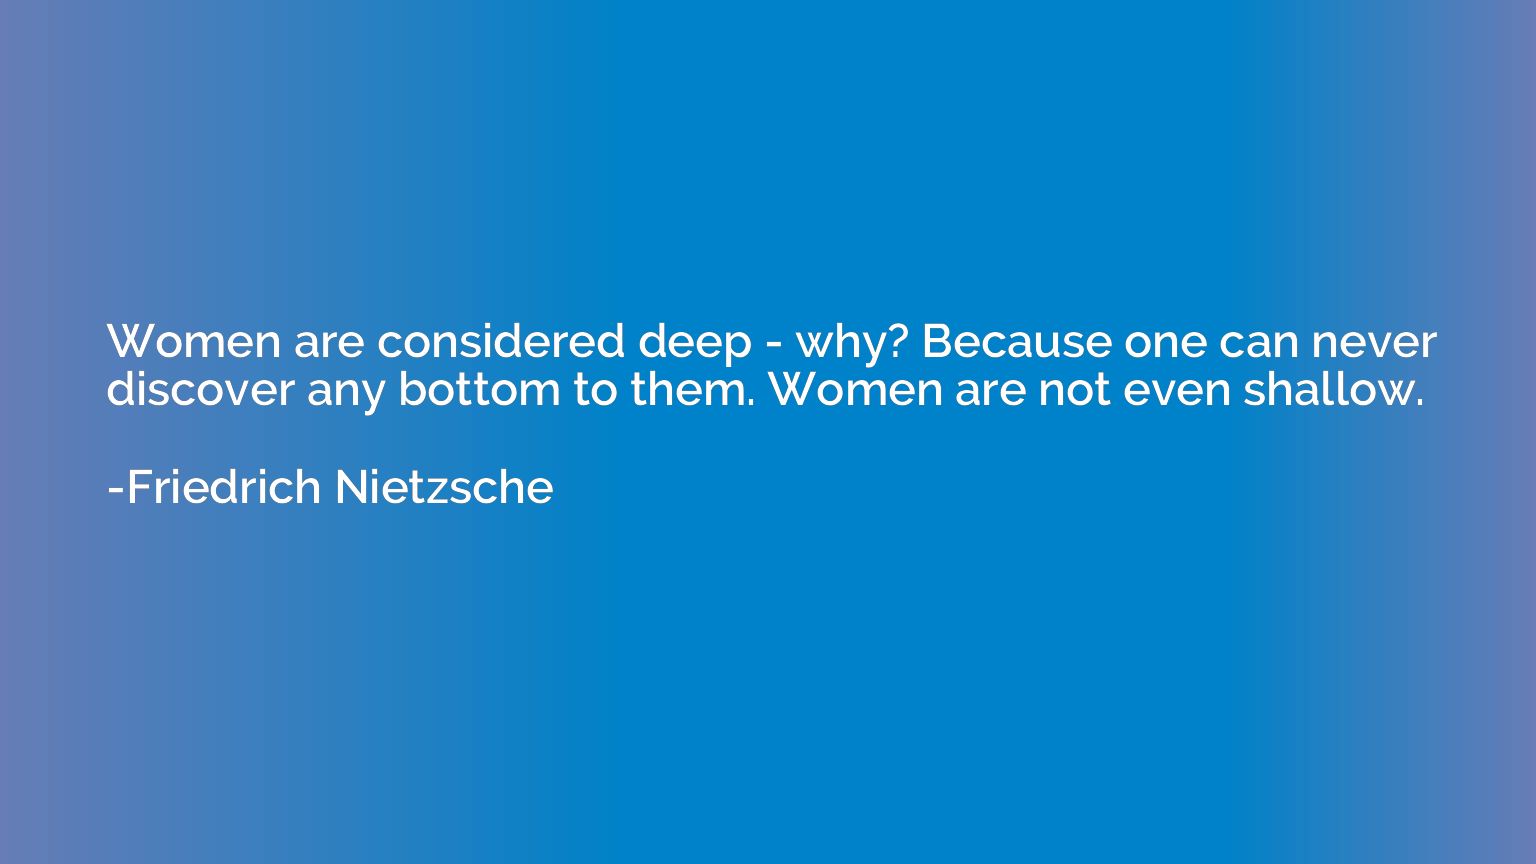 Women are considered deep - why? Because one can never disco